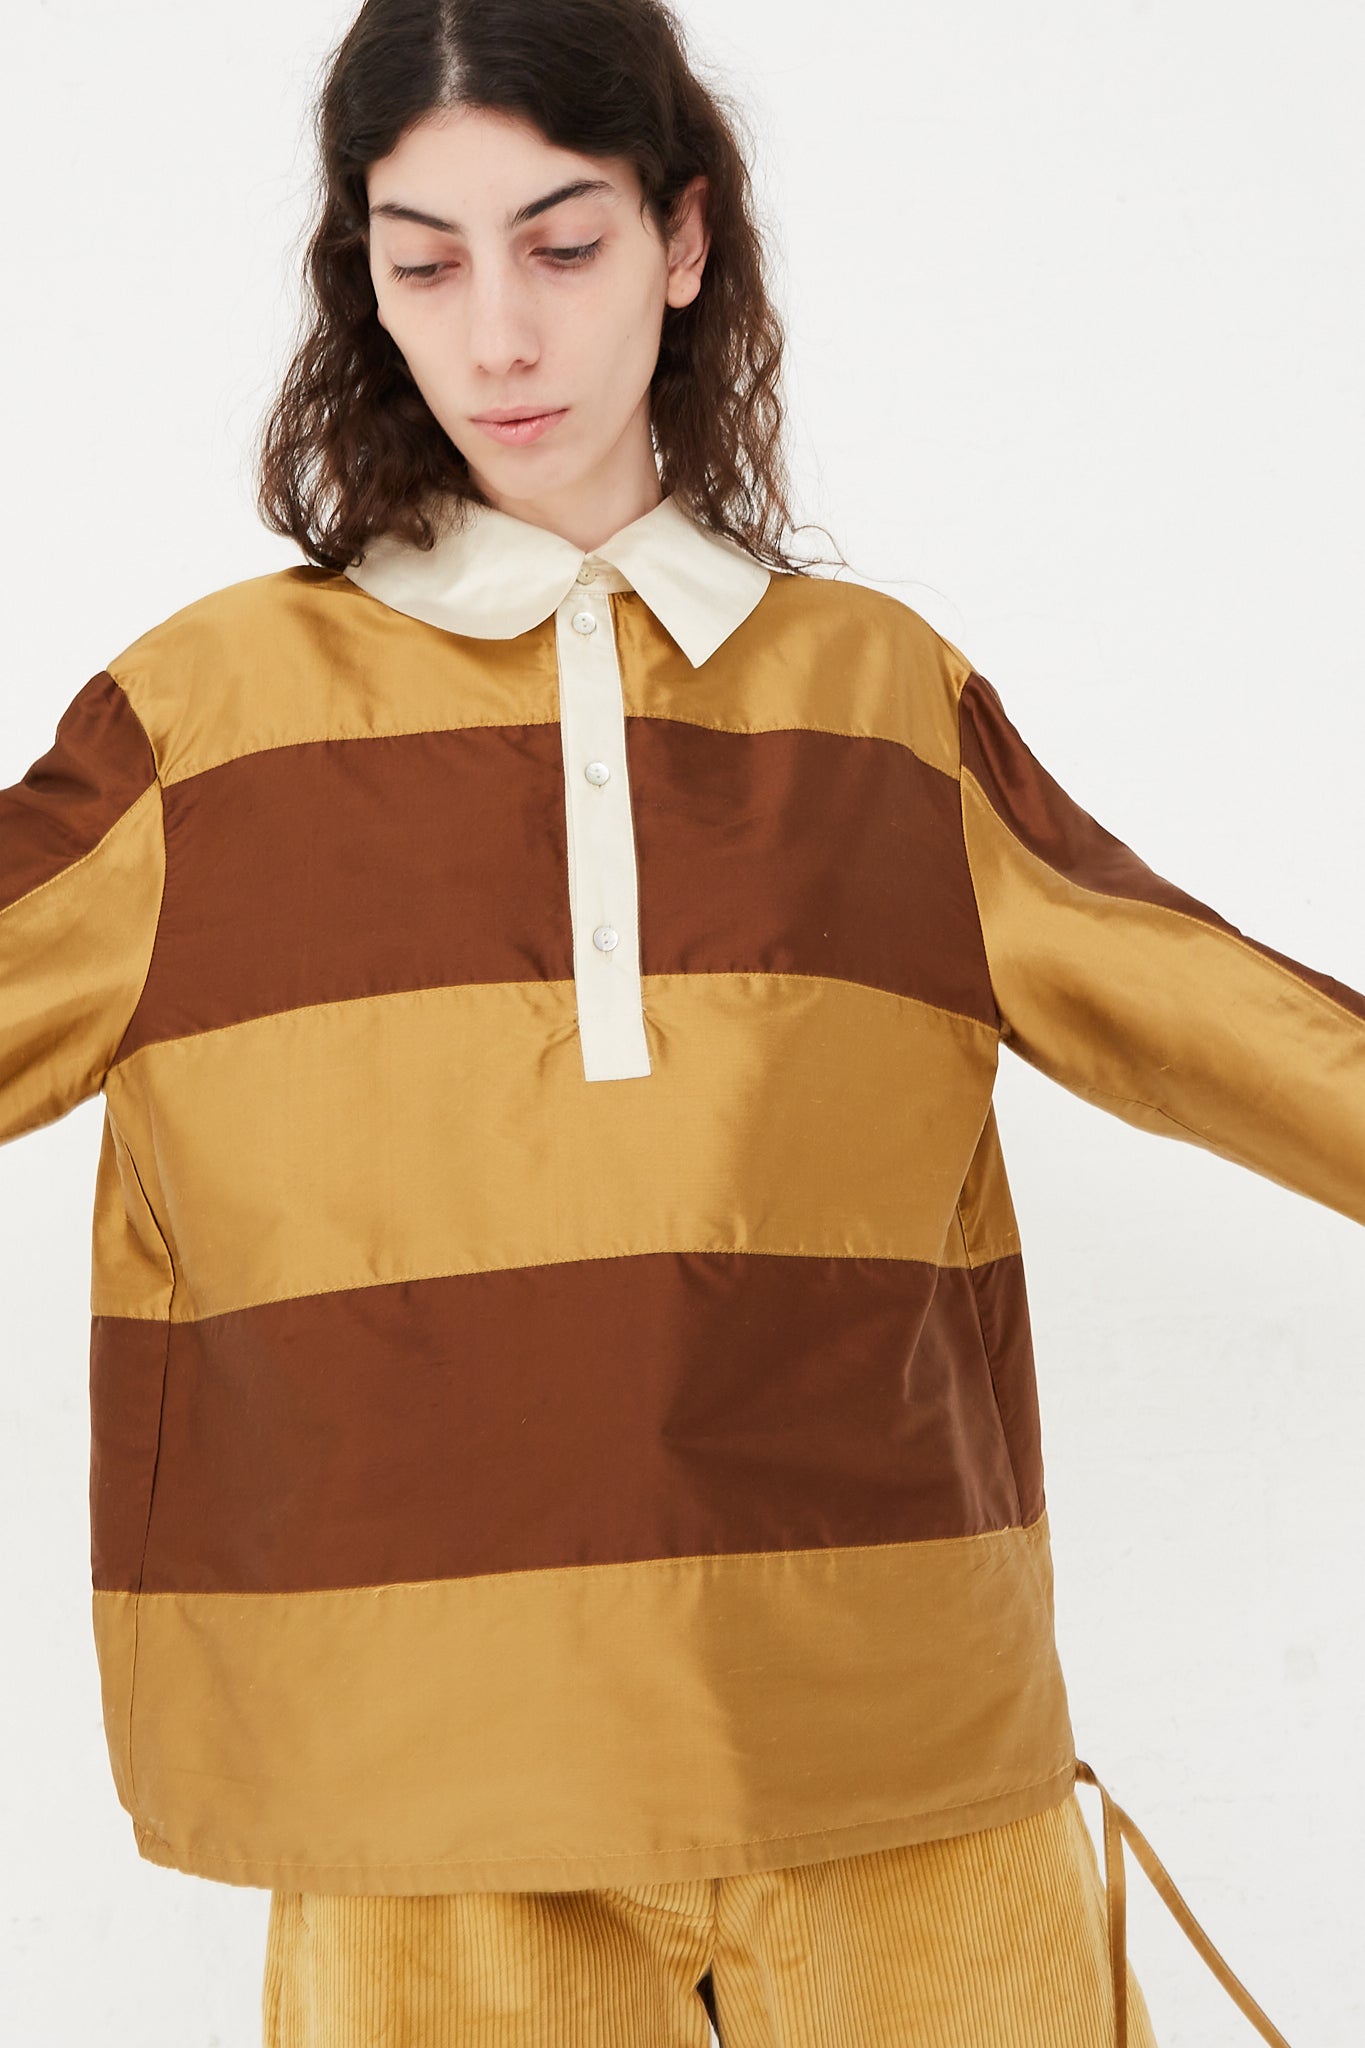 A model wearing a striped rugby shirt in a shiny silk doupion. Features a contrast fold-over collar and button placket, with an adjustable drawstring at hem. Front view and up close. Designed by Cawley - Oroboro Store 